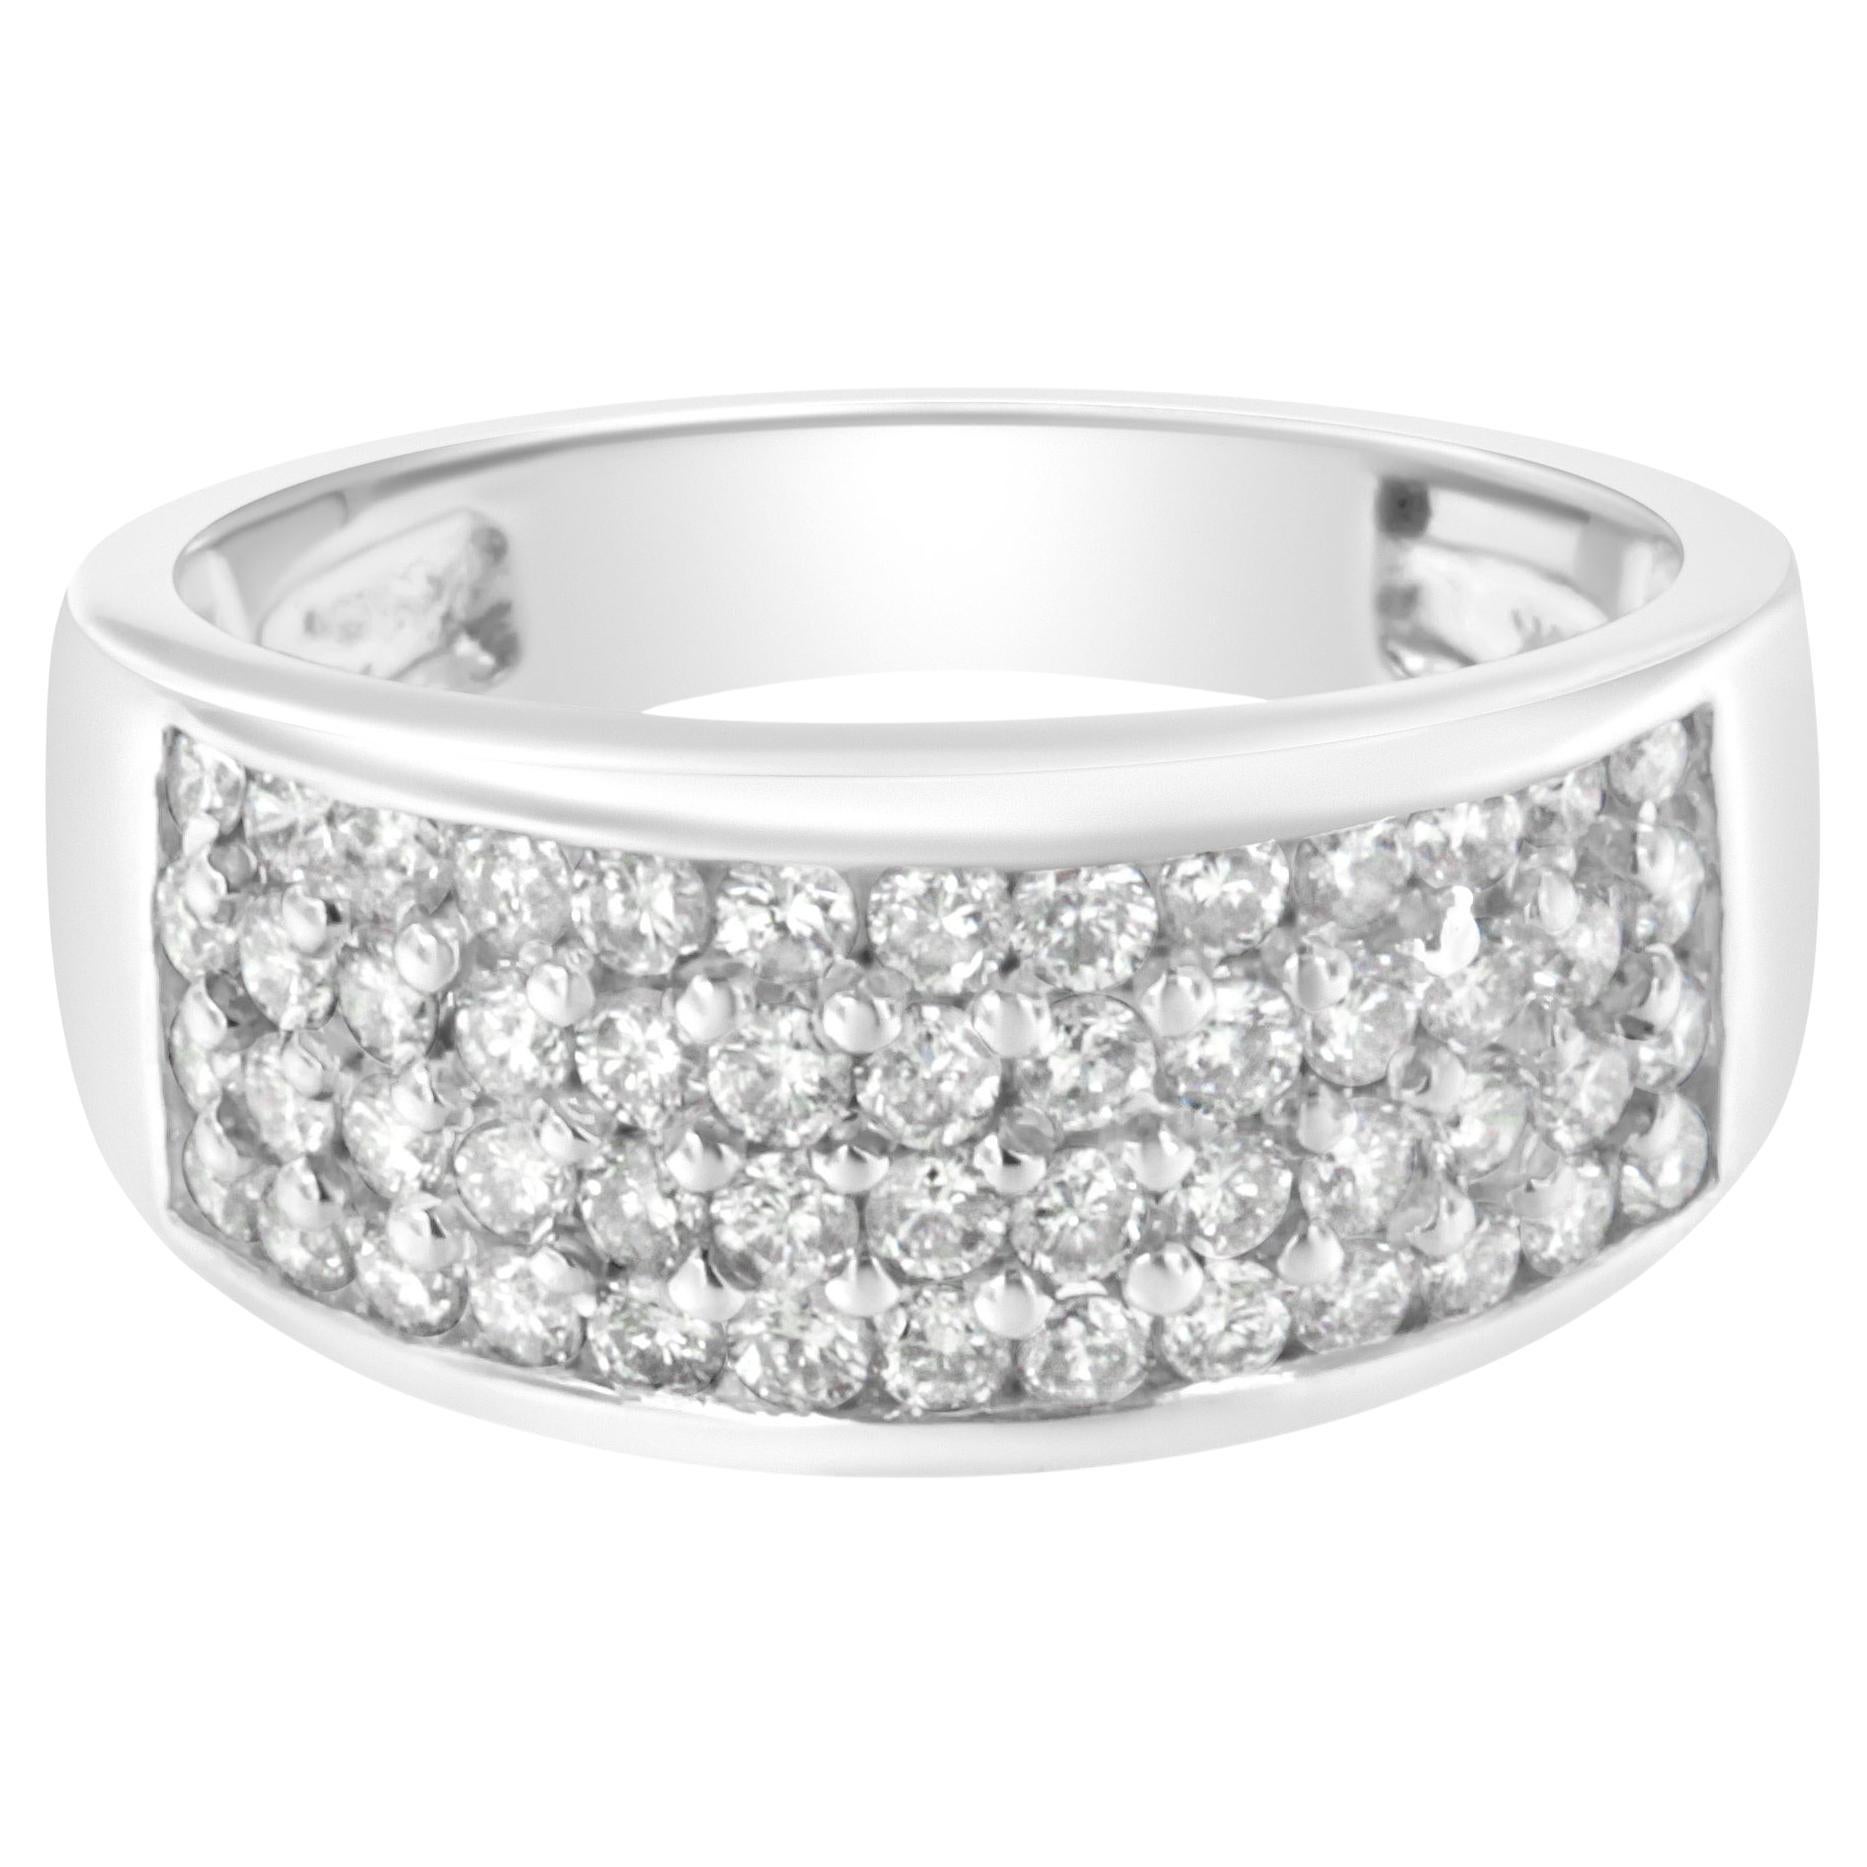 For Sale:  14K White Gold 1.00 Carat Diamond Cocktail Band Ring